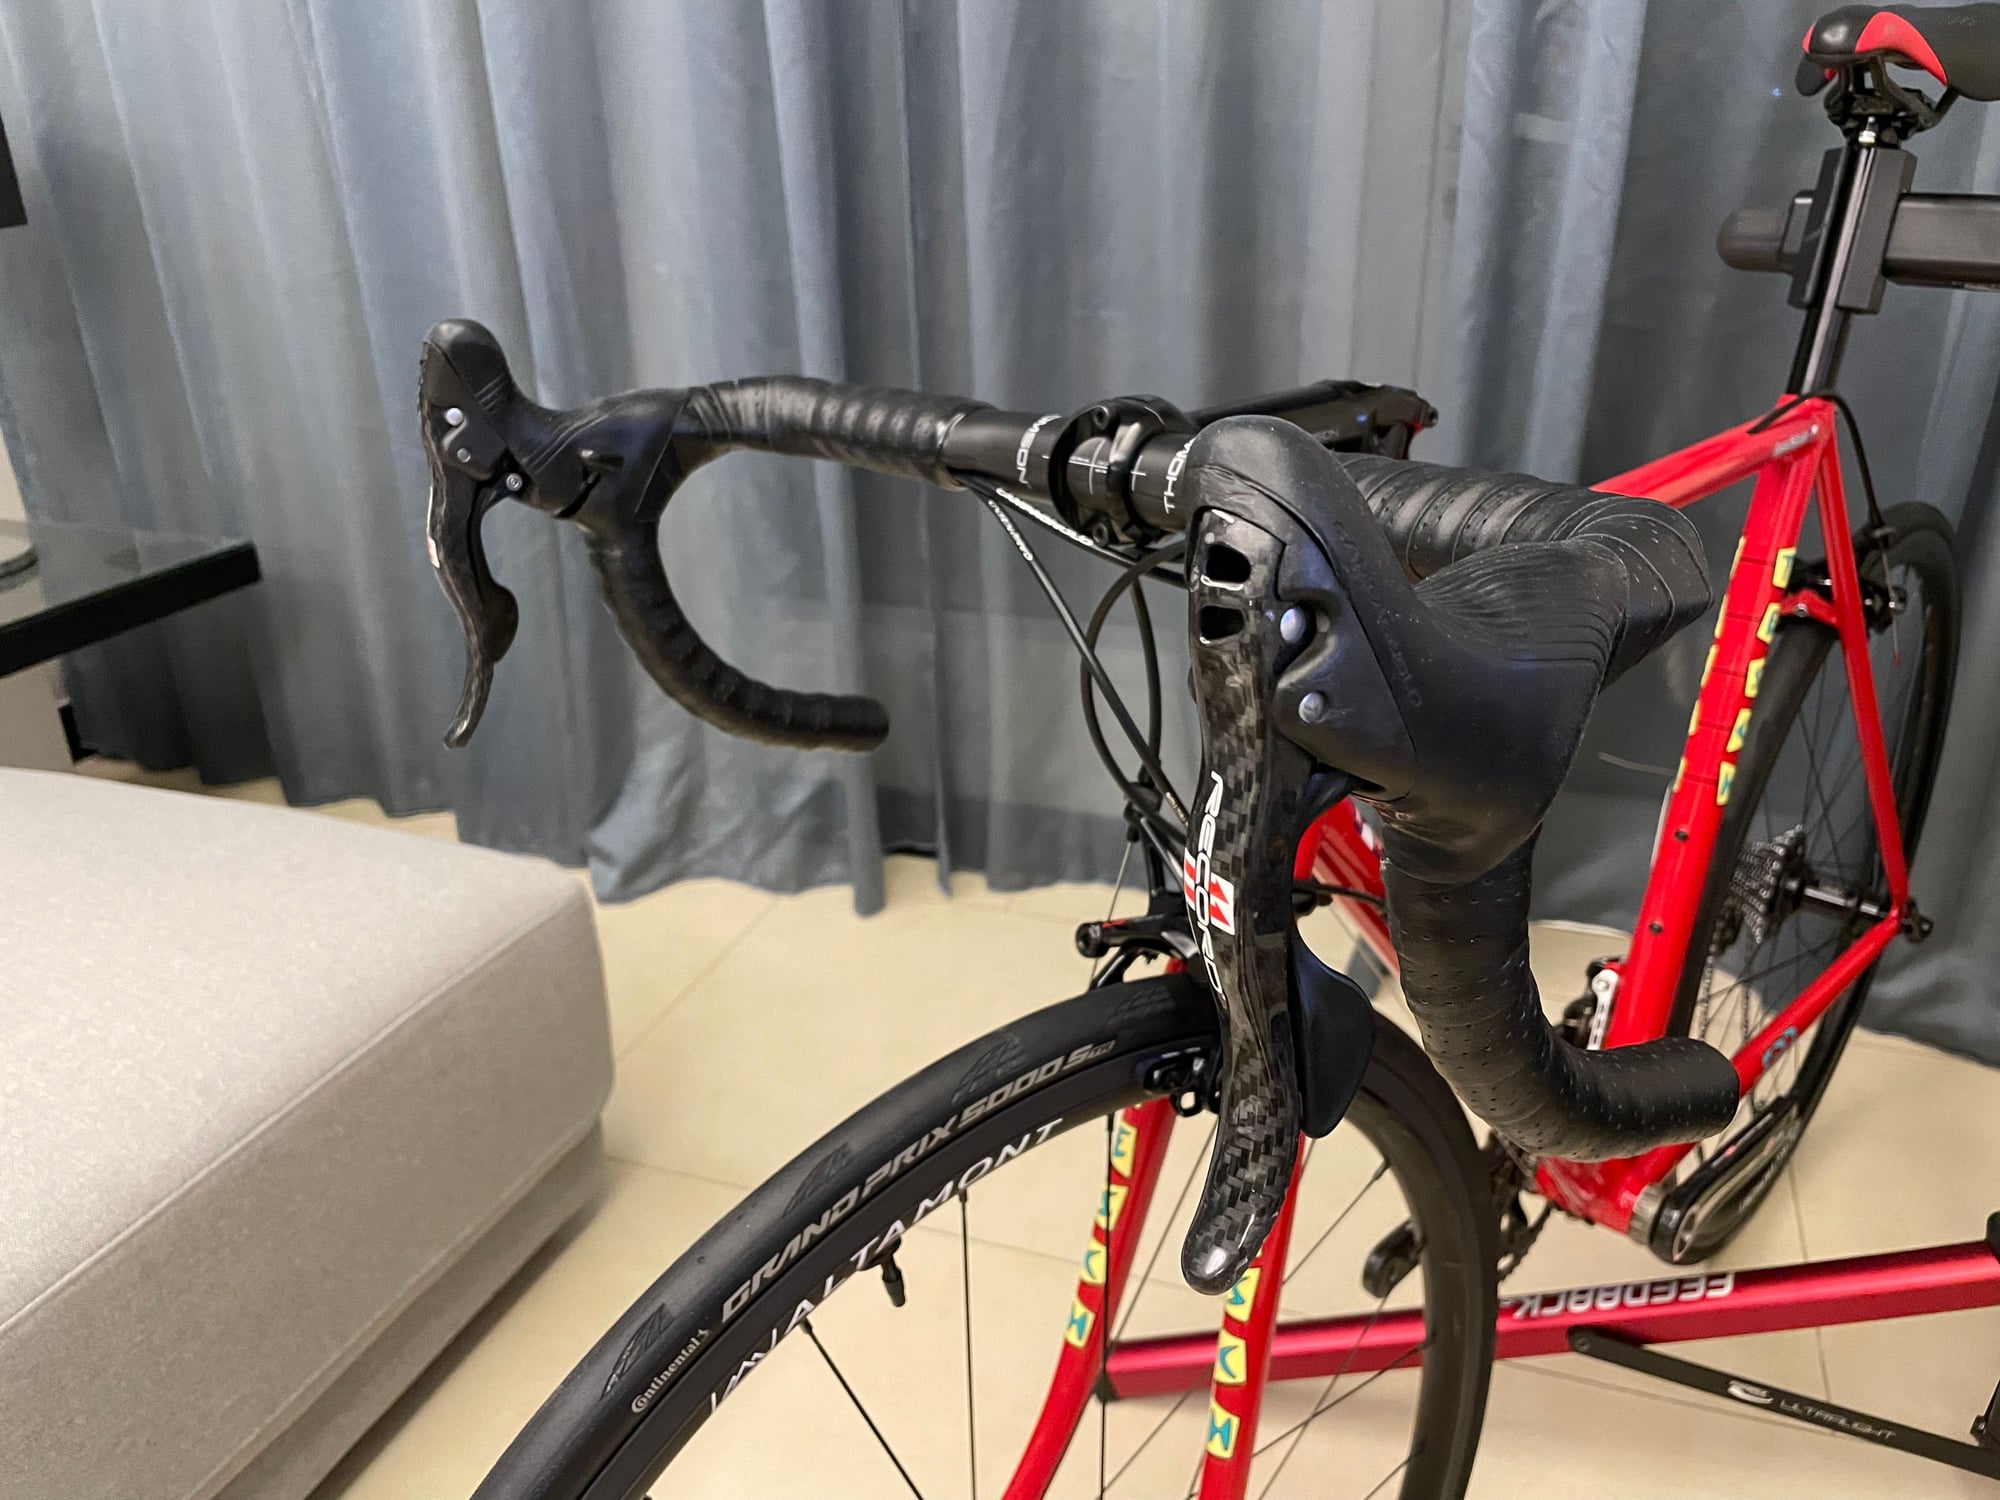 White leather handlebar tape? - Page 3 - Bike Forums